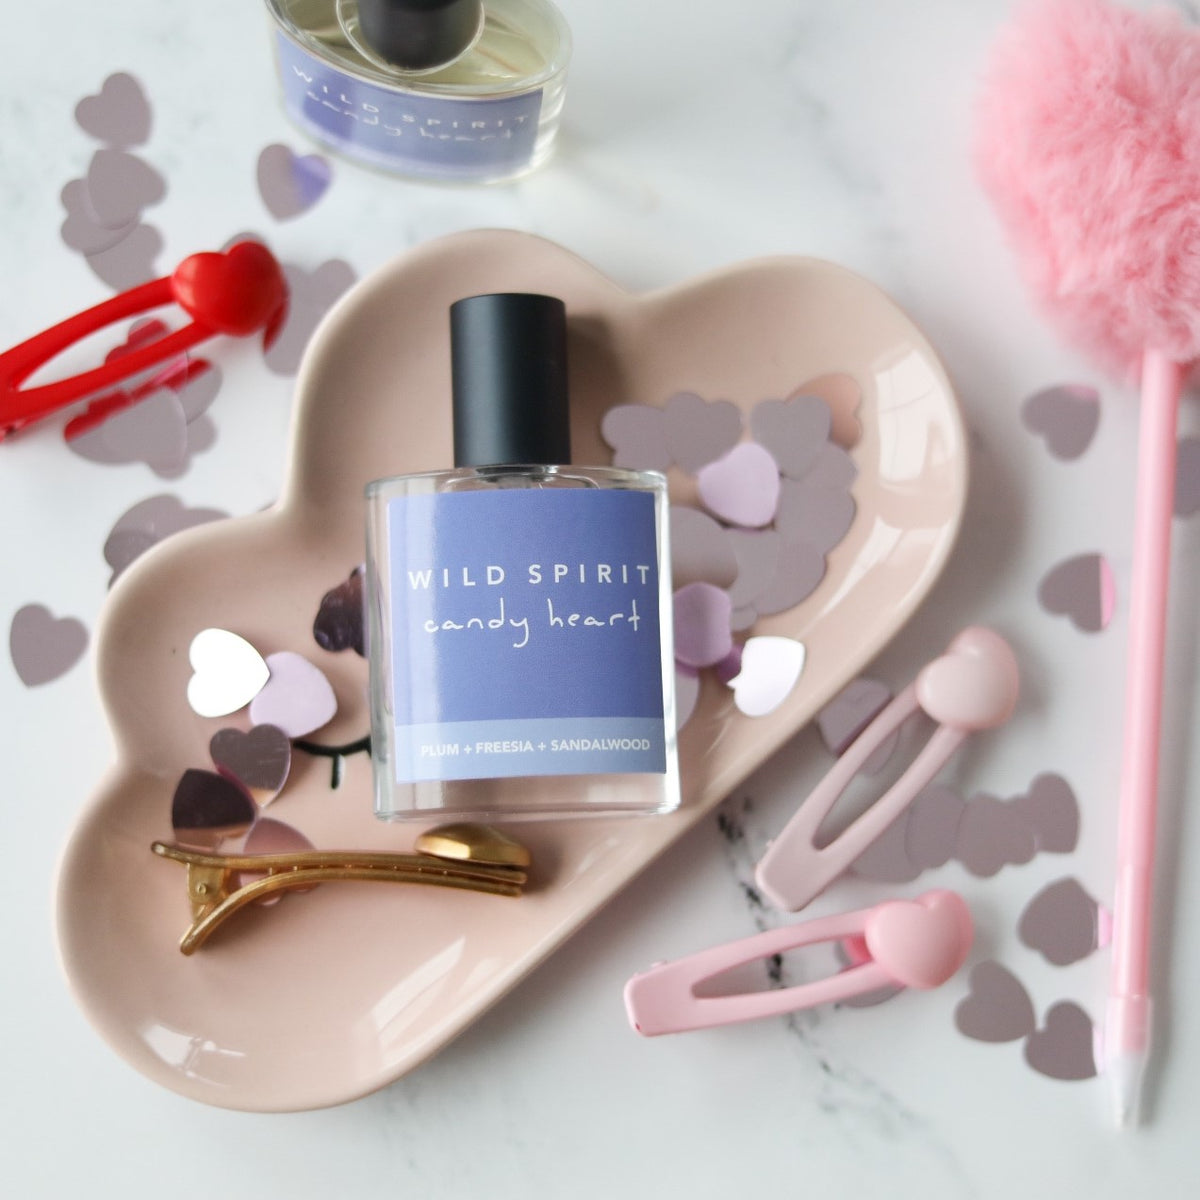 Candy Heart Eau de Parfum Spray - Wild Spirit, Enjoy juicy fruits and shimmering woods highlighted with an ethereal bouquet of flowers for a fruity, sassy scent.